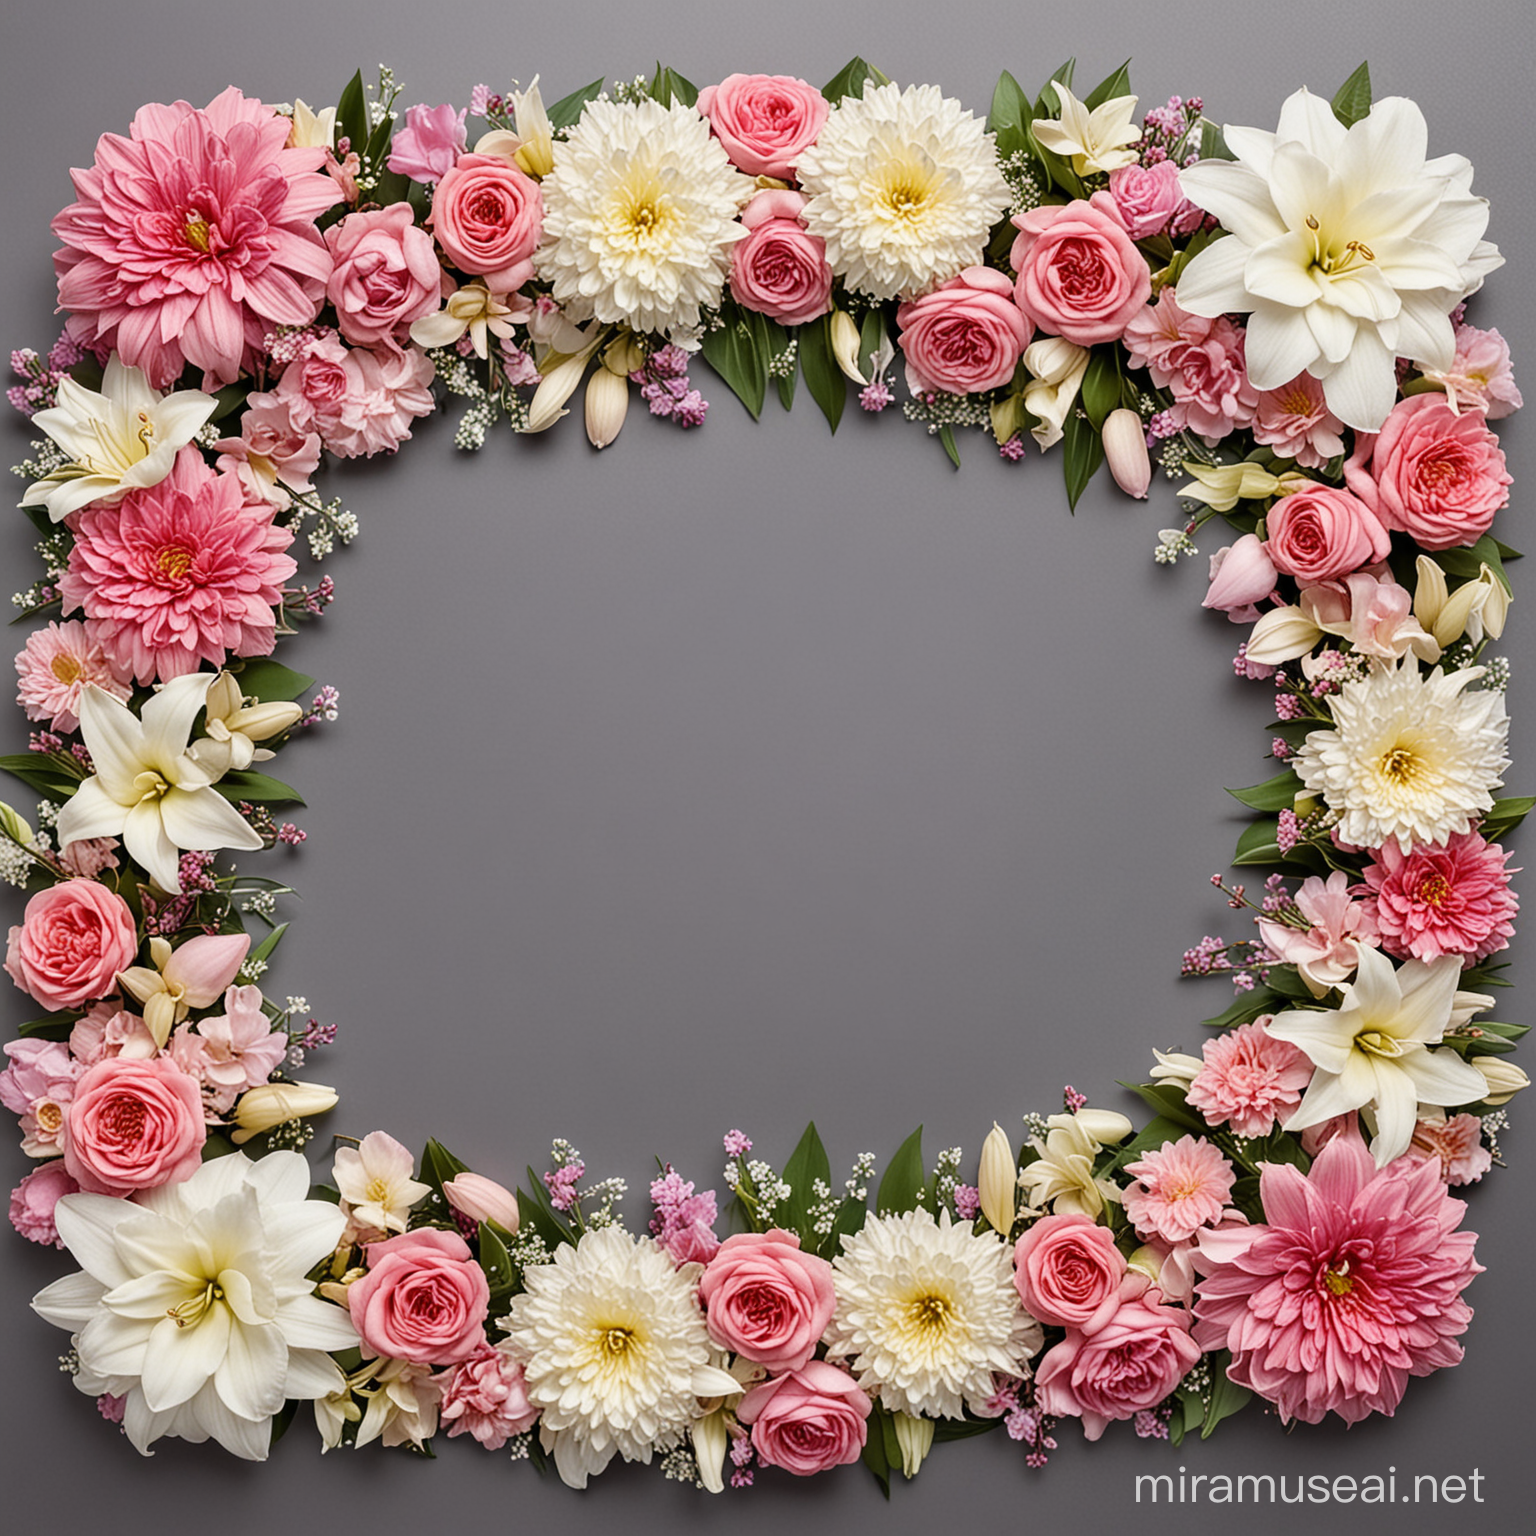 Border with beautiful ivt, orchidee, roses, carnations, lilies, calla, chrysanthemums